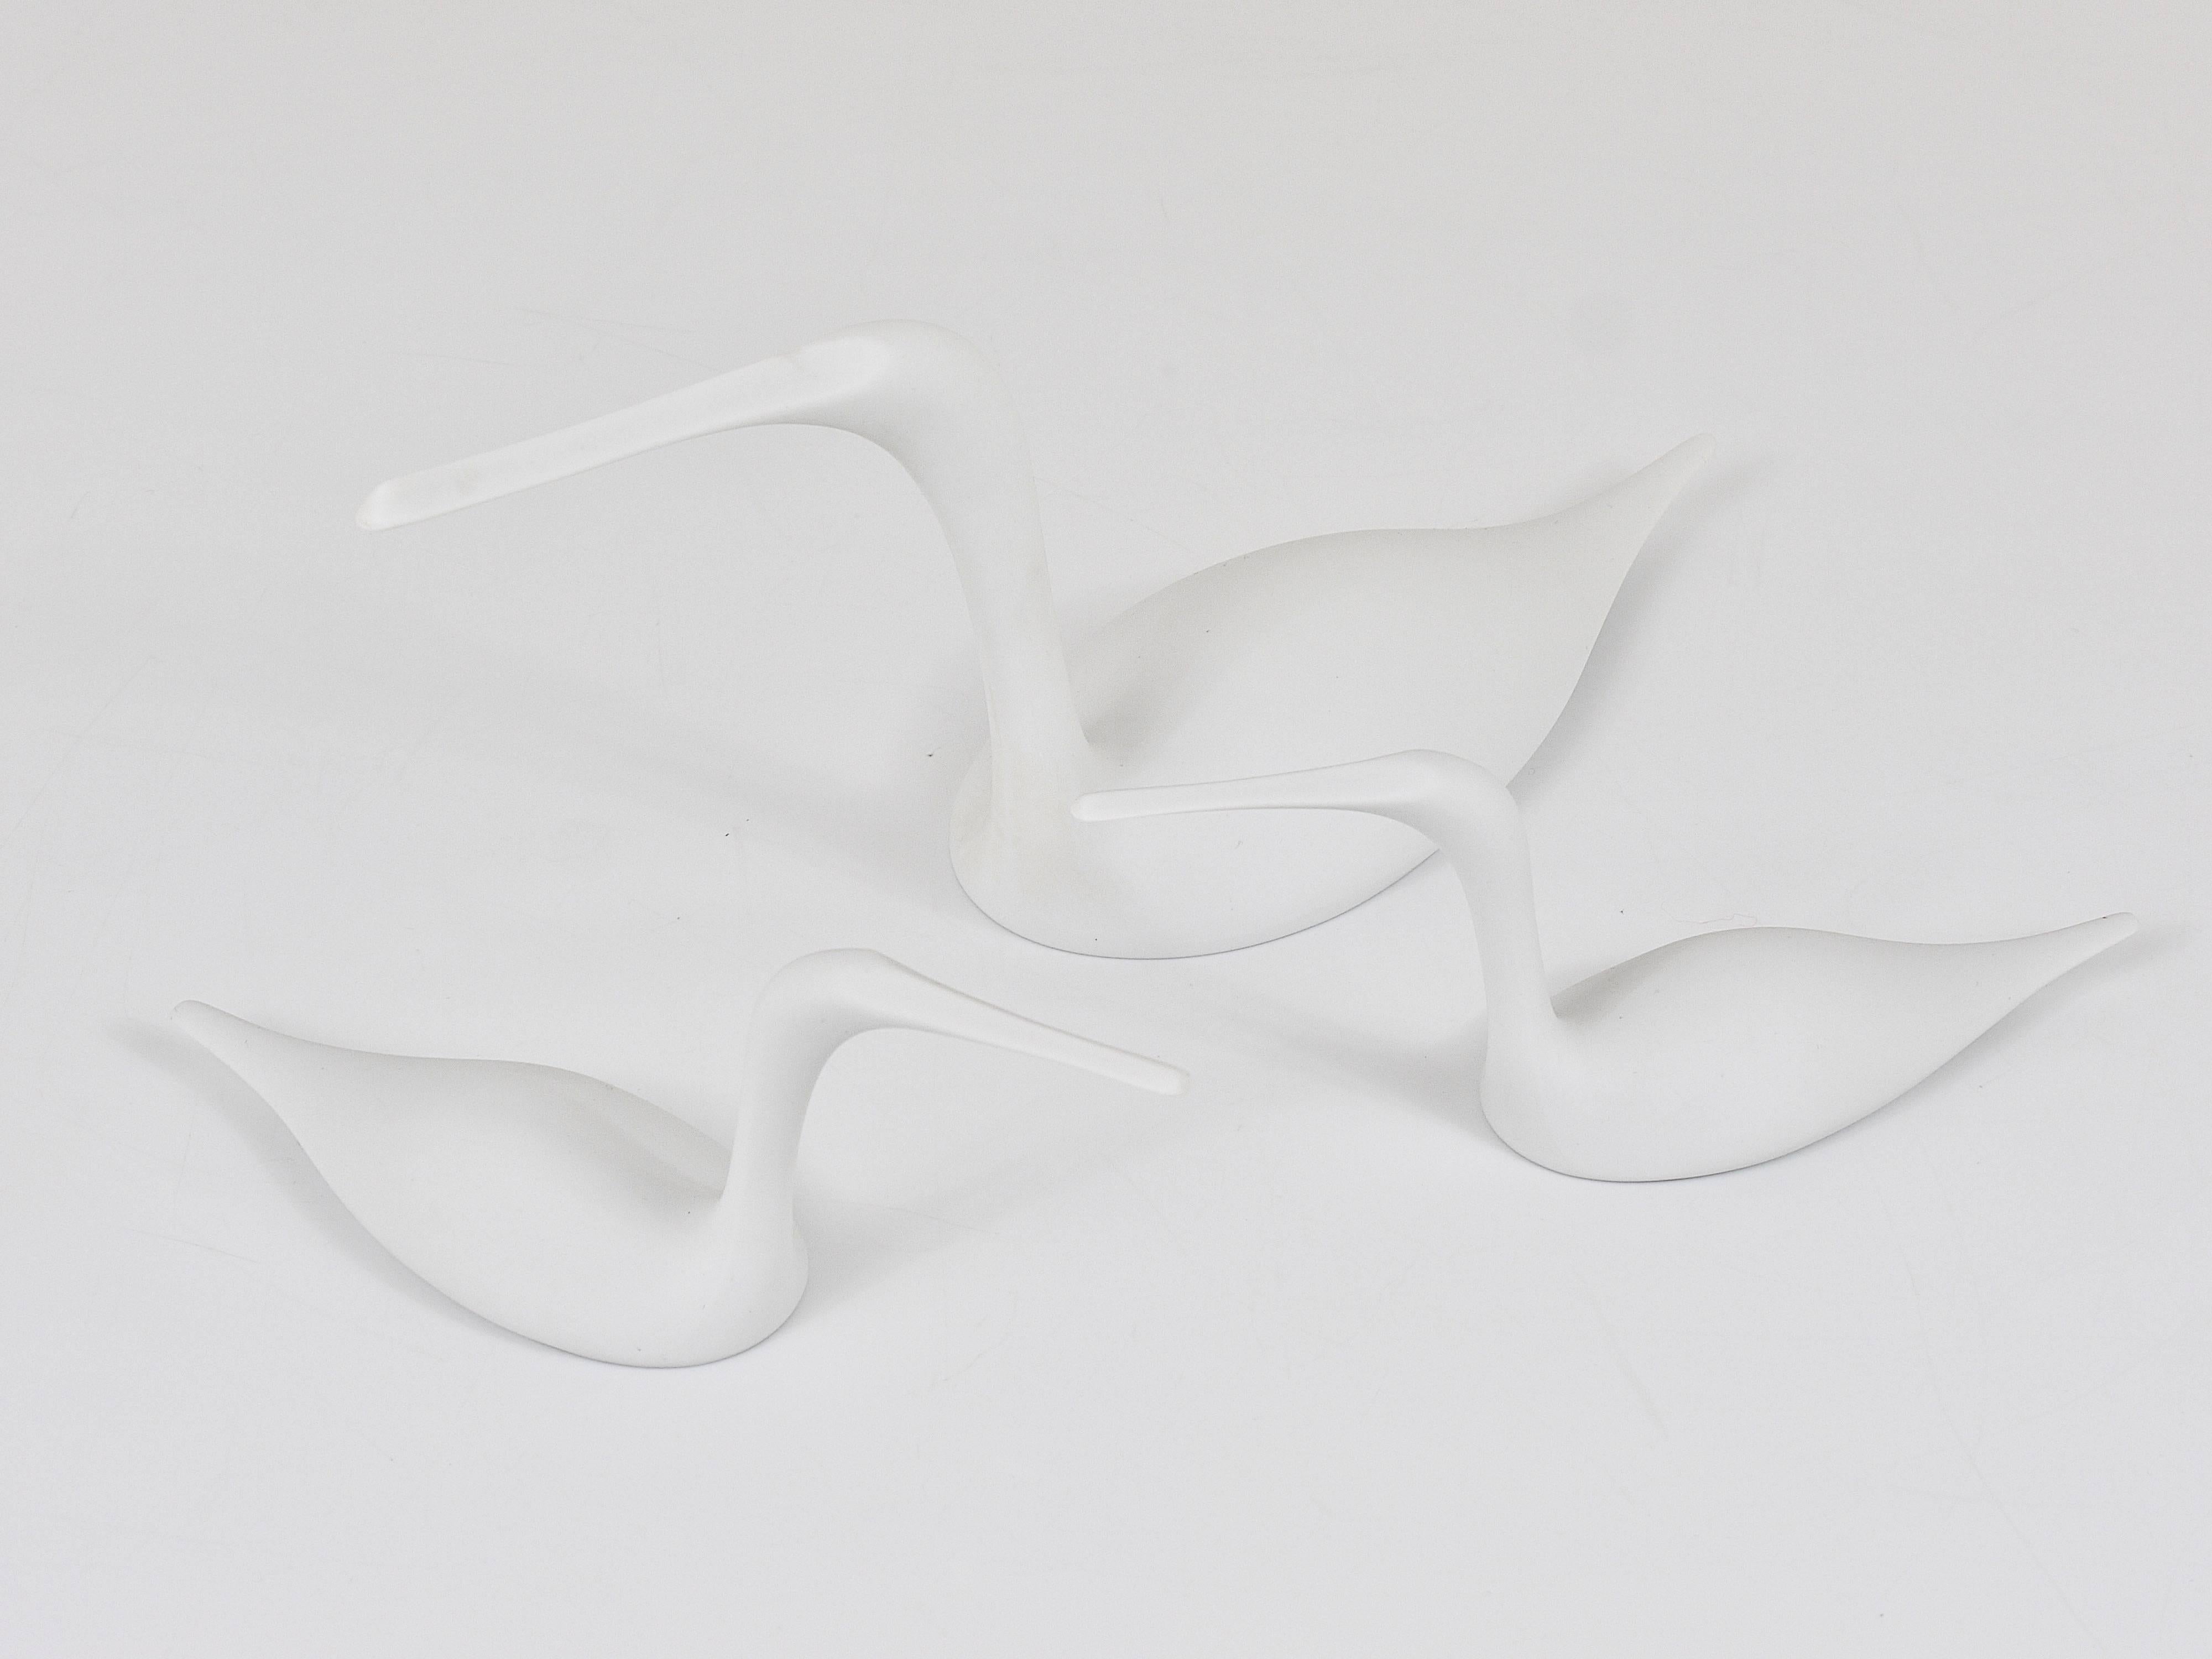 A decorative set of three swimming common lone birds from the 1970s. Designed by Tapio Wirkkala for Rosenthal Studio-line, Germany. Beautiful pieces, made of white, matte porcelain. In excellent condition. 

The bigger bird measures: 15